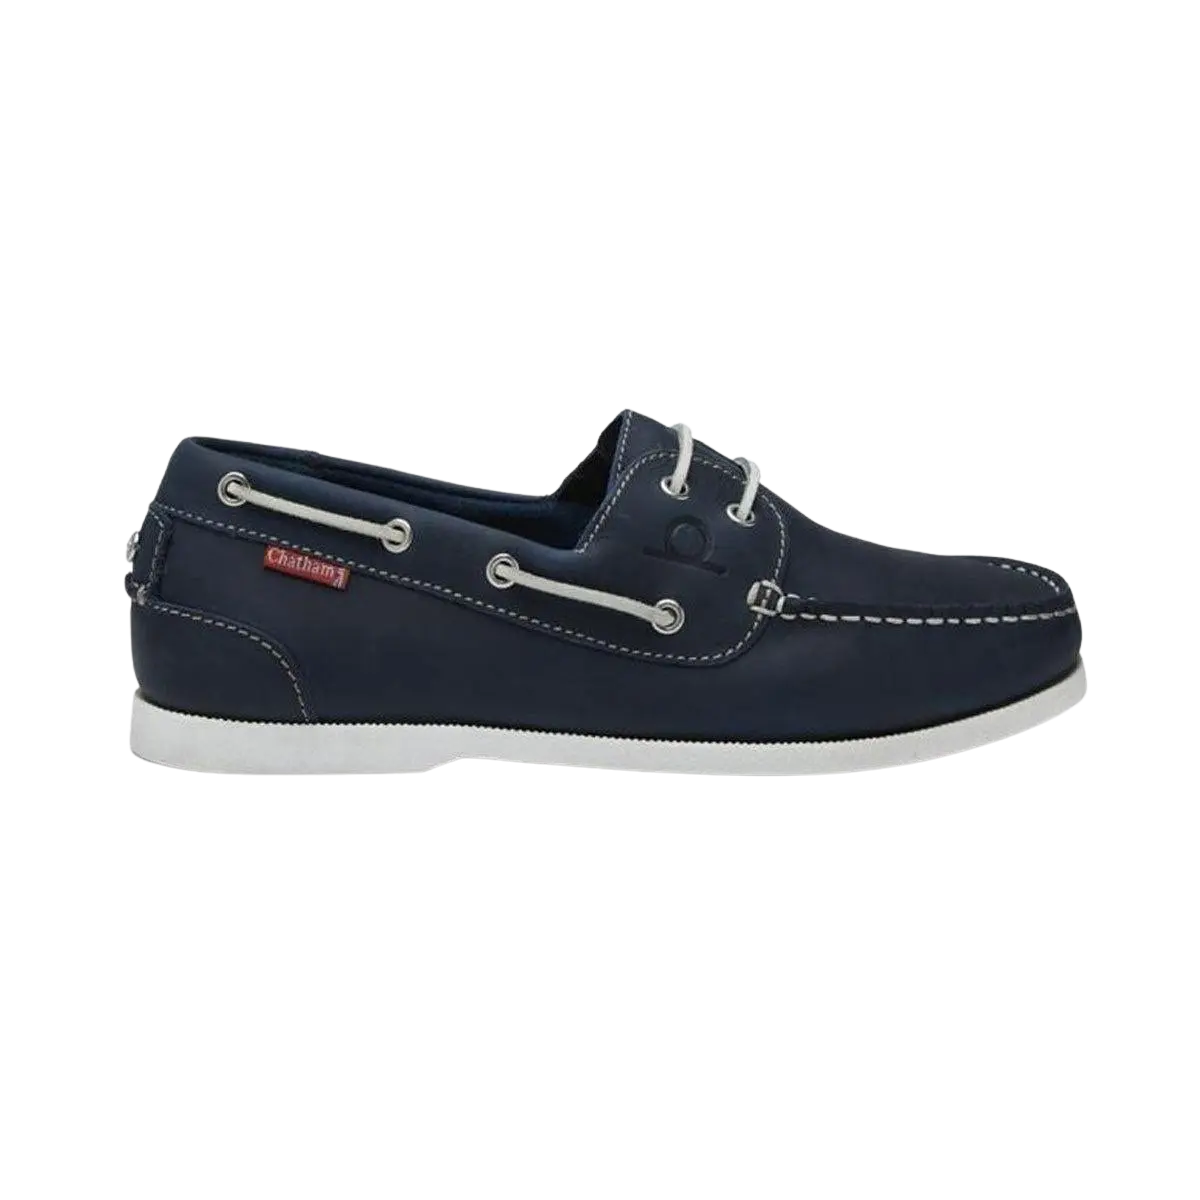 Chatham Galley II Boat Shoes for Men